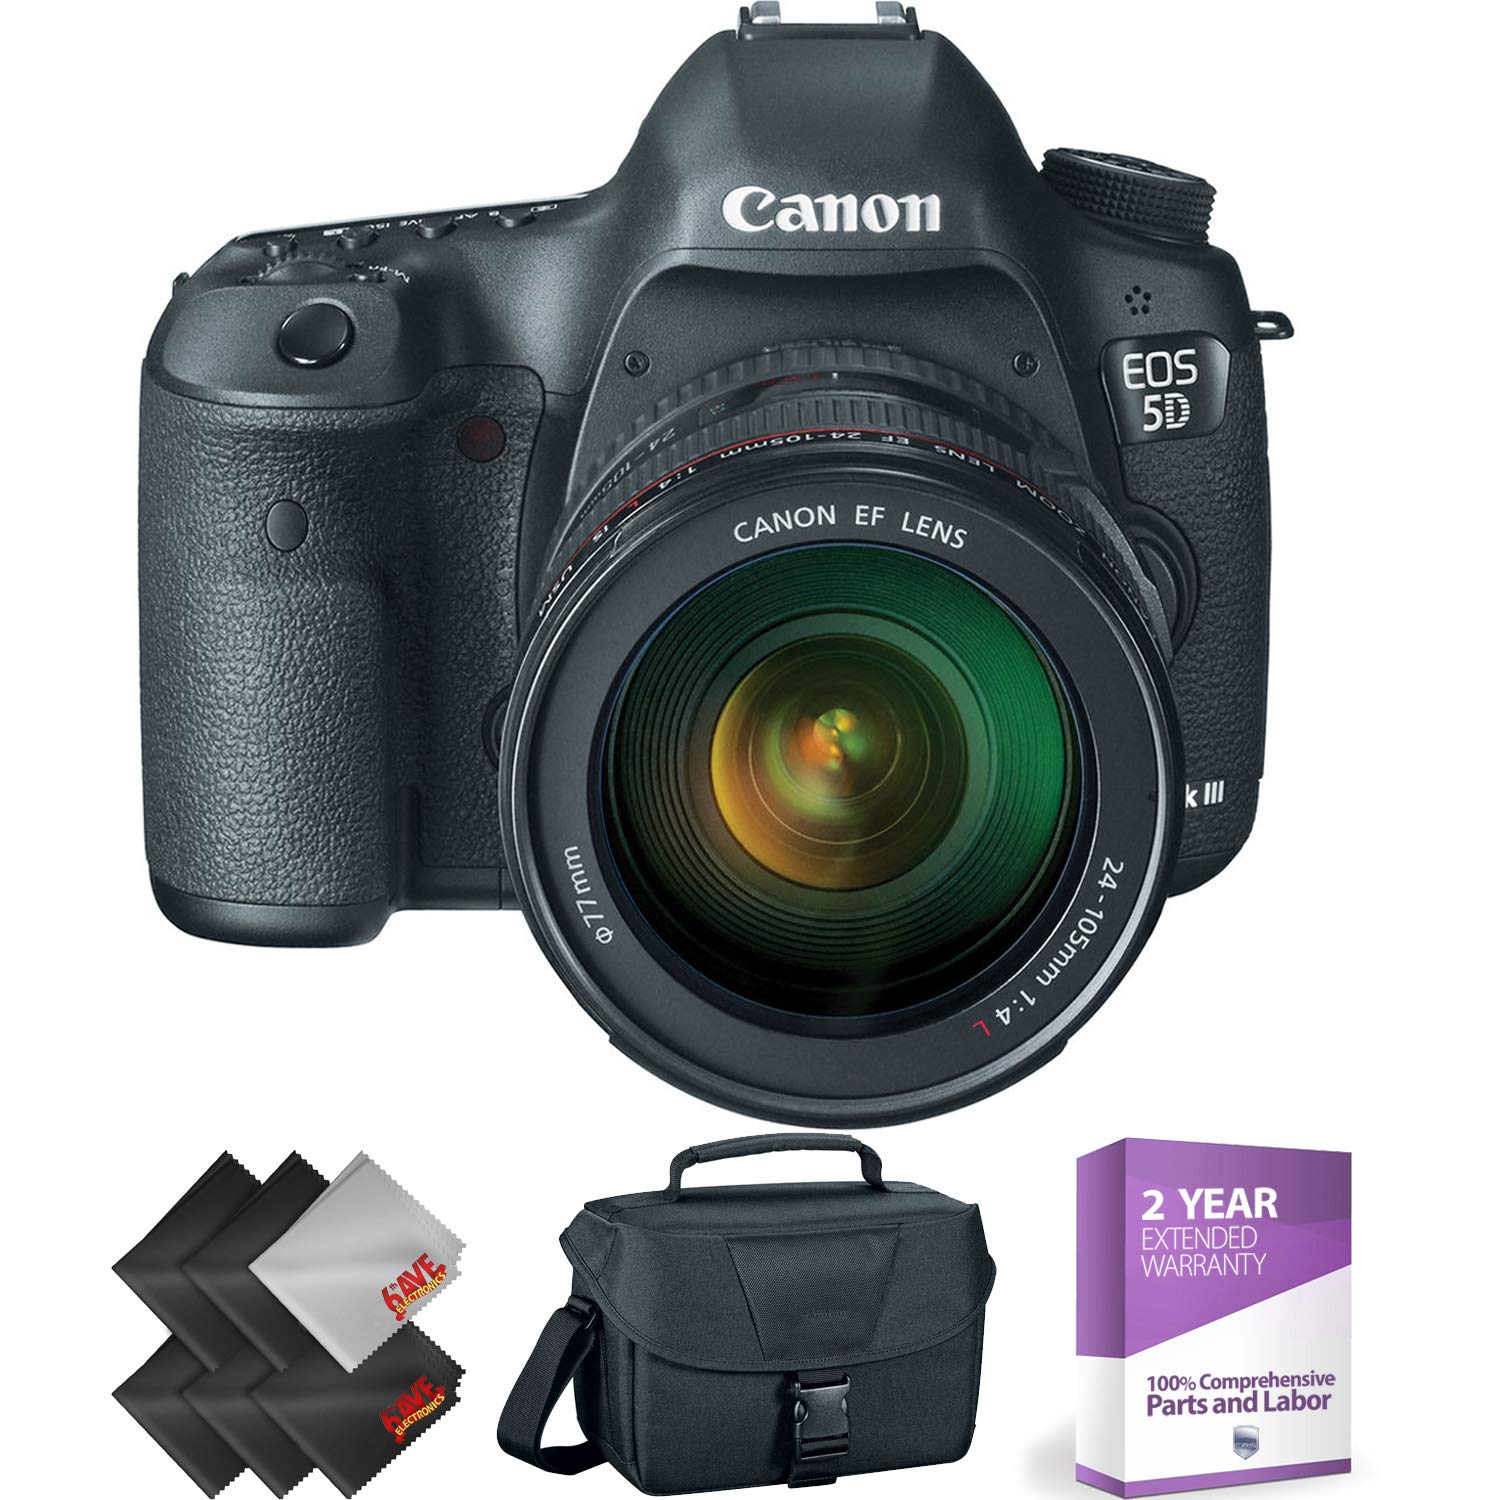 Canon EOS 5D Mark III DSLR Camera with 24-105mm Lens + 1 Year Warranty Bundle